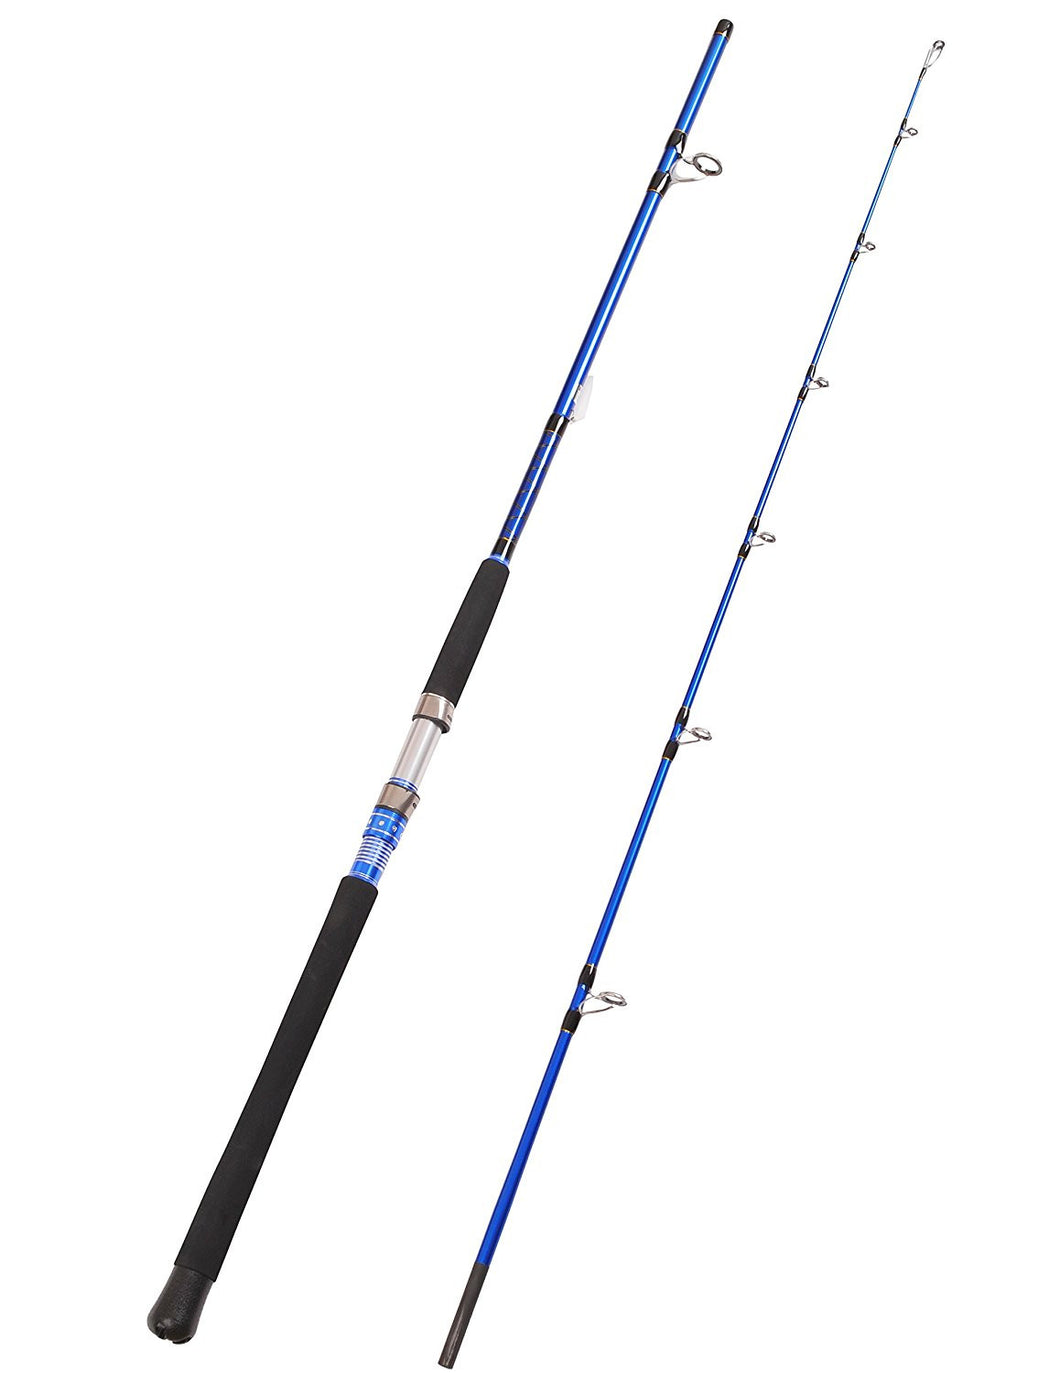 Fin-Nor Tidal 7'6 Spinning Saltwater Rod 